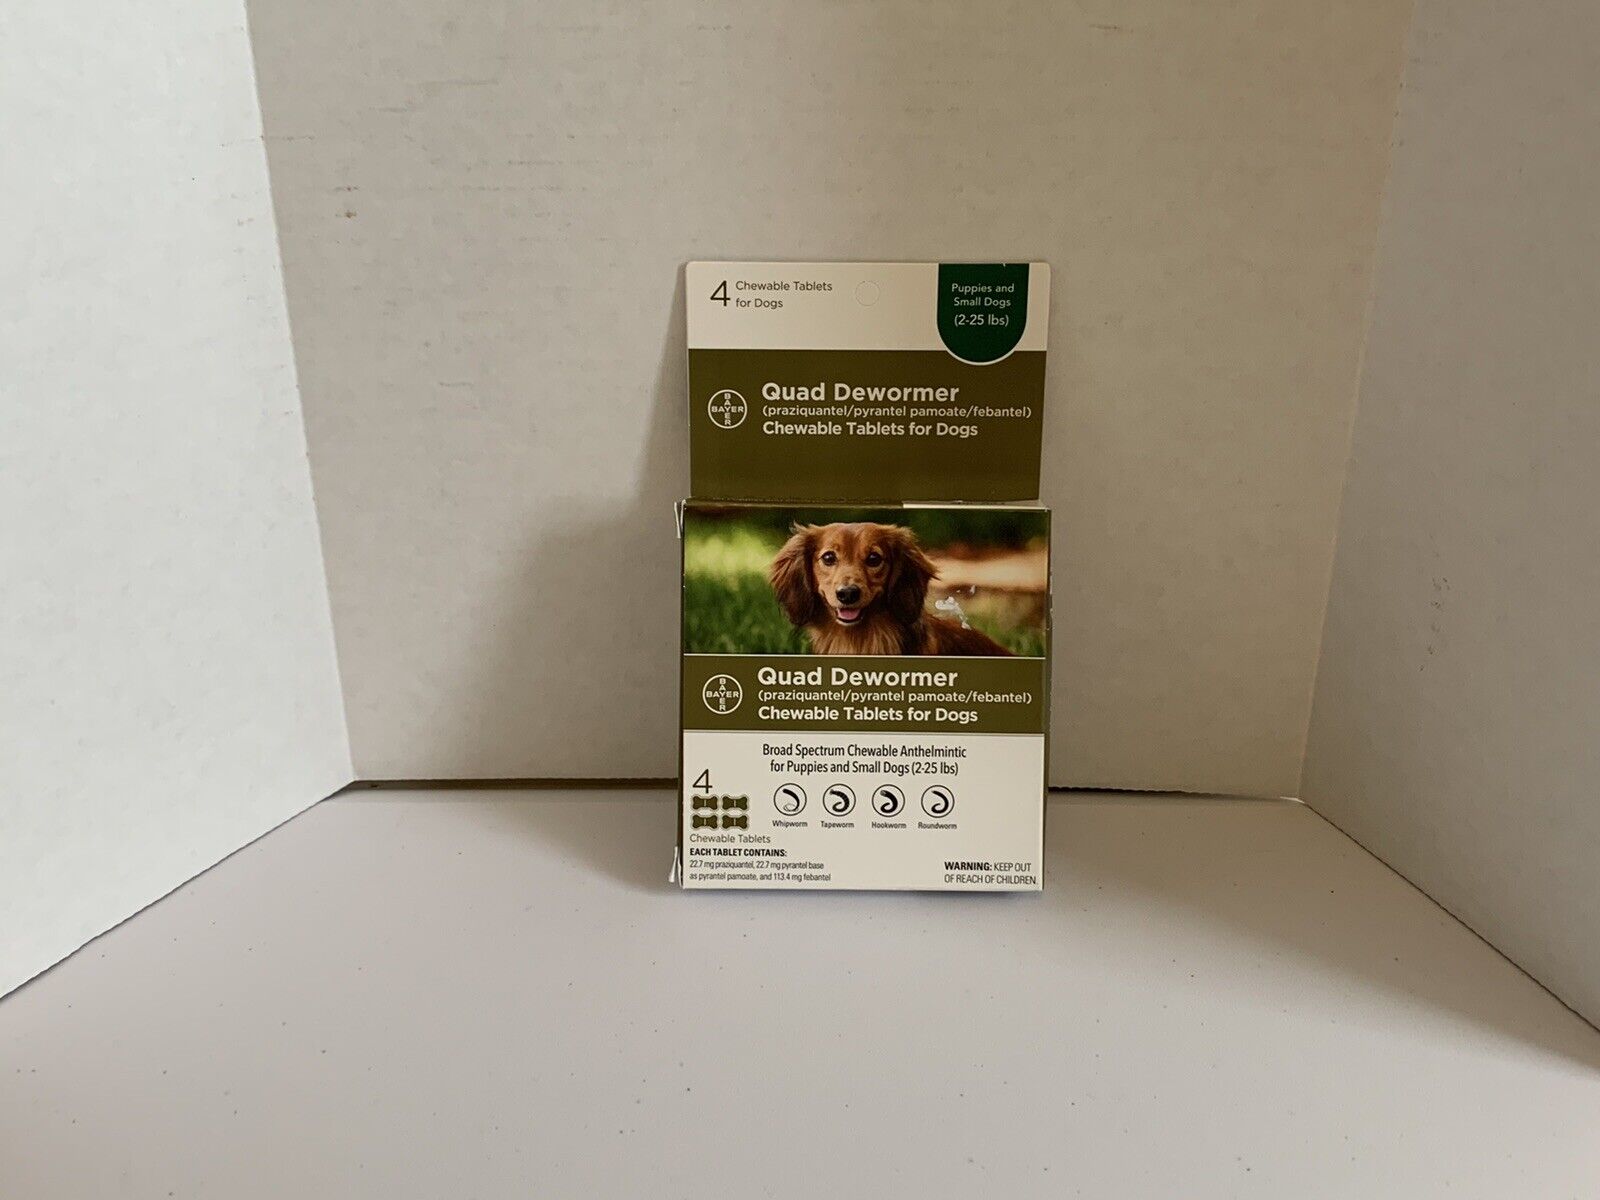 Brand New Bayer Chewable Quad Dewormer for Small Dogs 2-25 lbs 4 tablets (04/23)